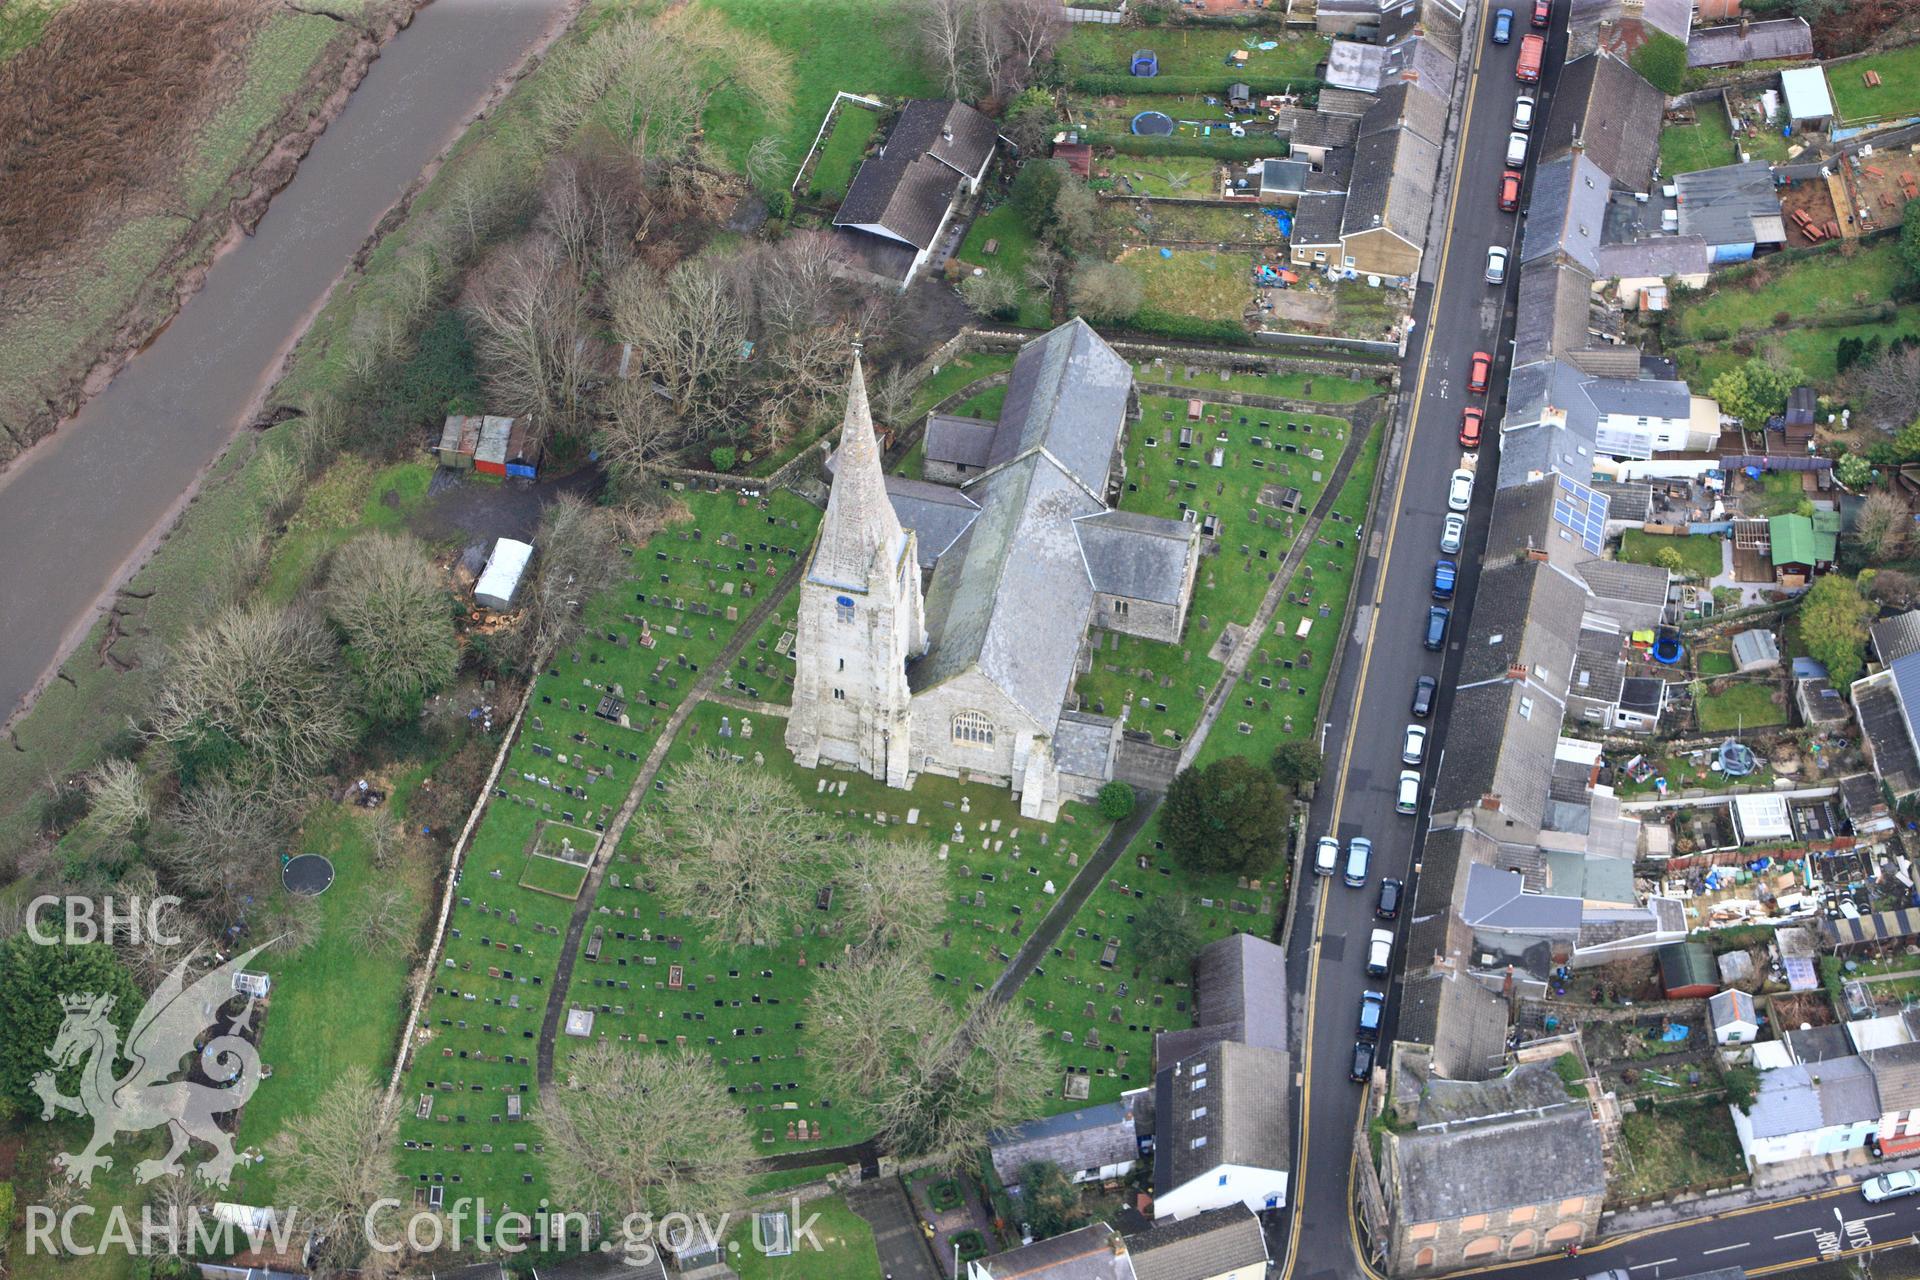 RCAHMW colour oblique photograph of St. Mary's Church, Kidwelly. Taken by Toby Driver on 27/01/2012.